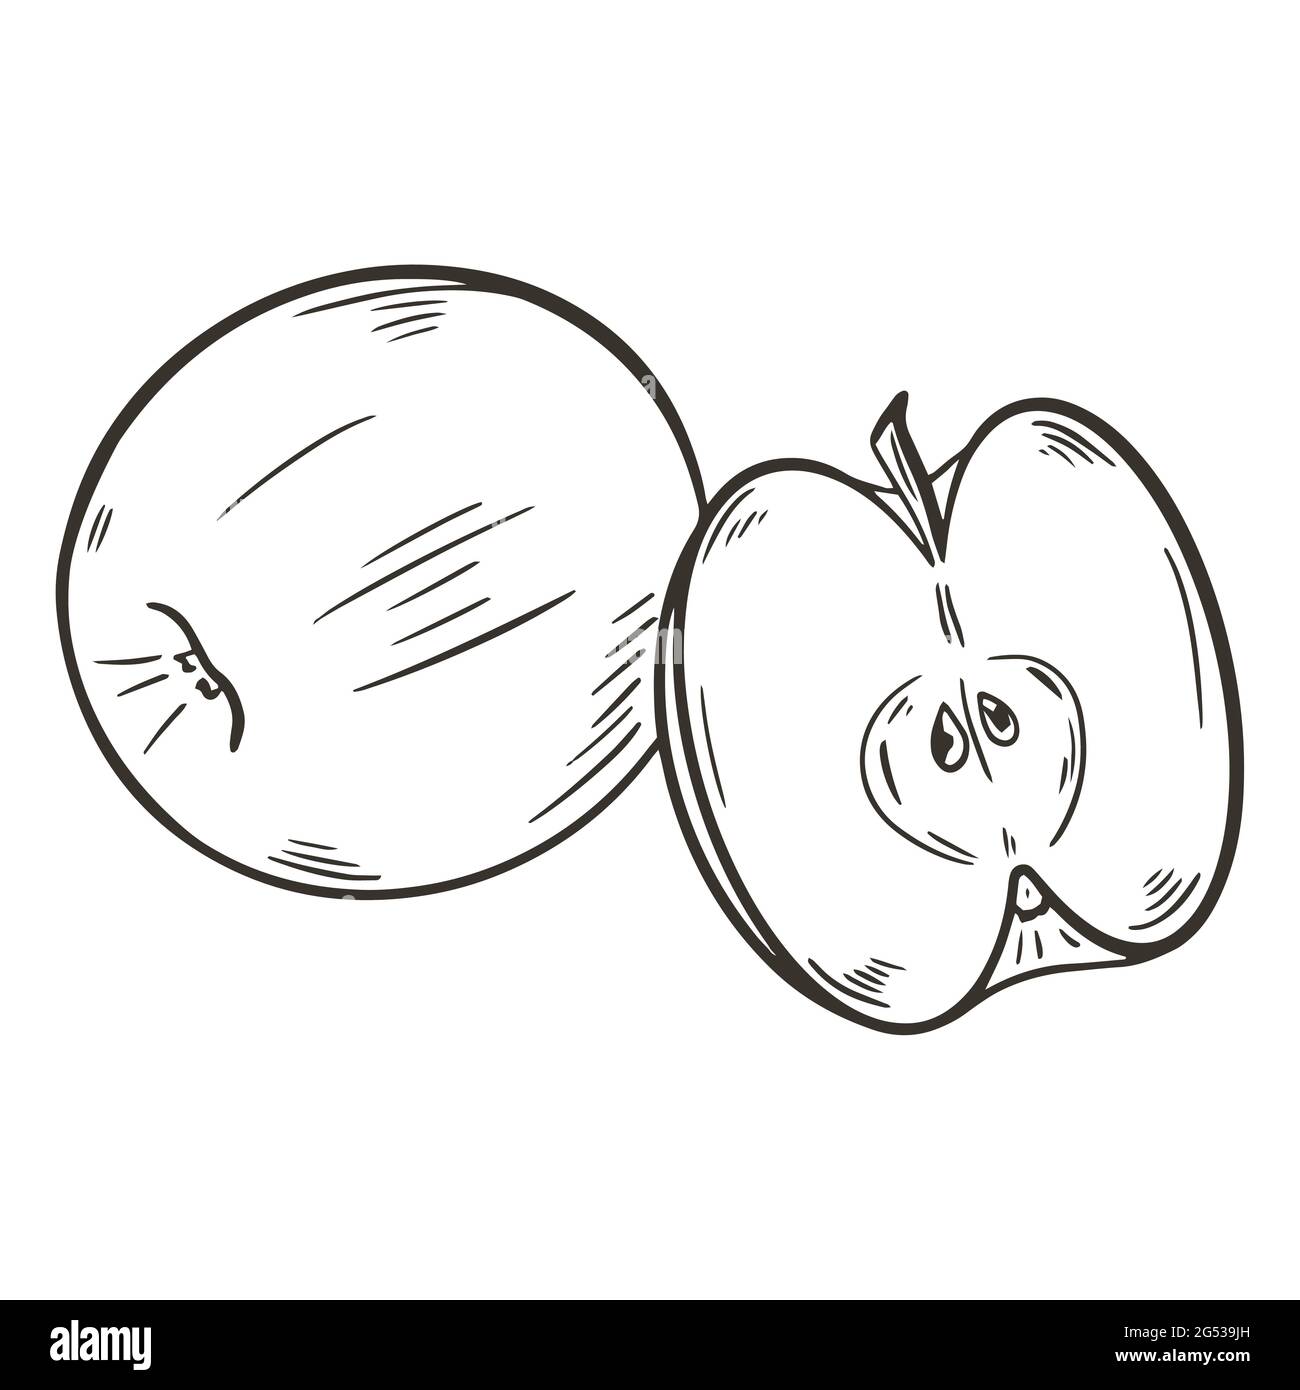 Pair of apples, vector illustration. Sketch hand drawing apple whole and half. Fruit engraving, natural healthy organic food. Stock Vector